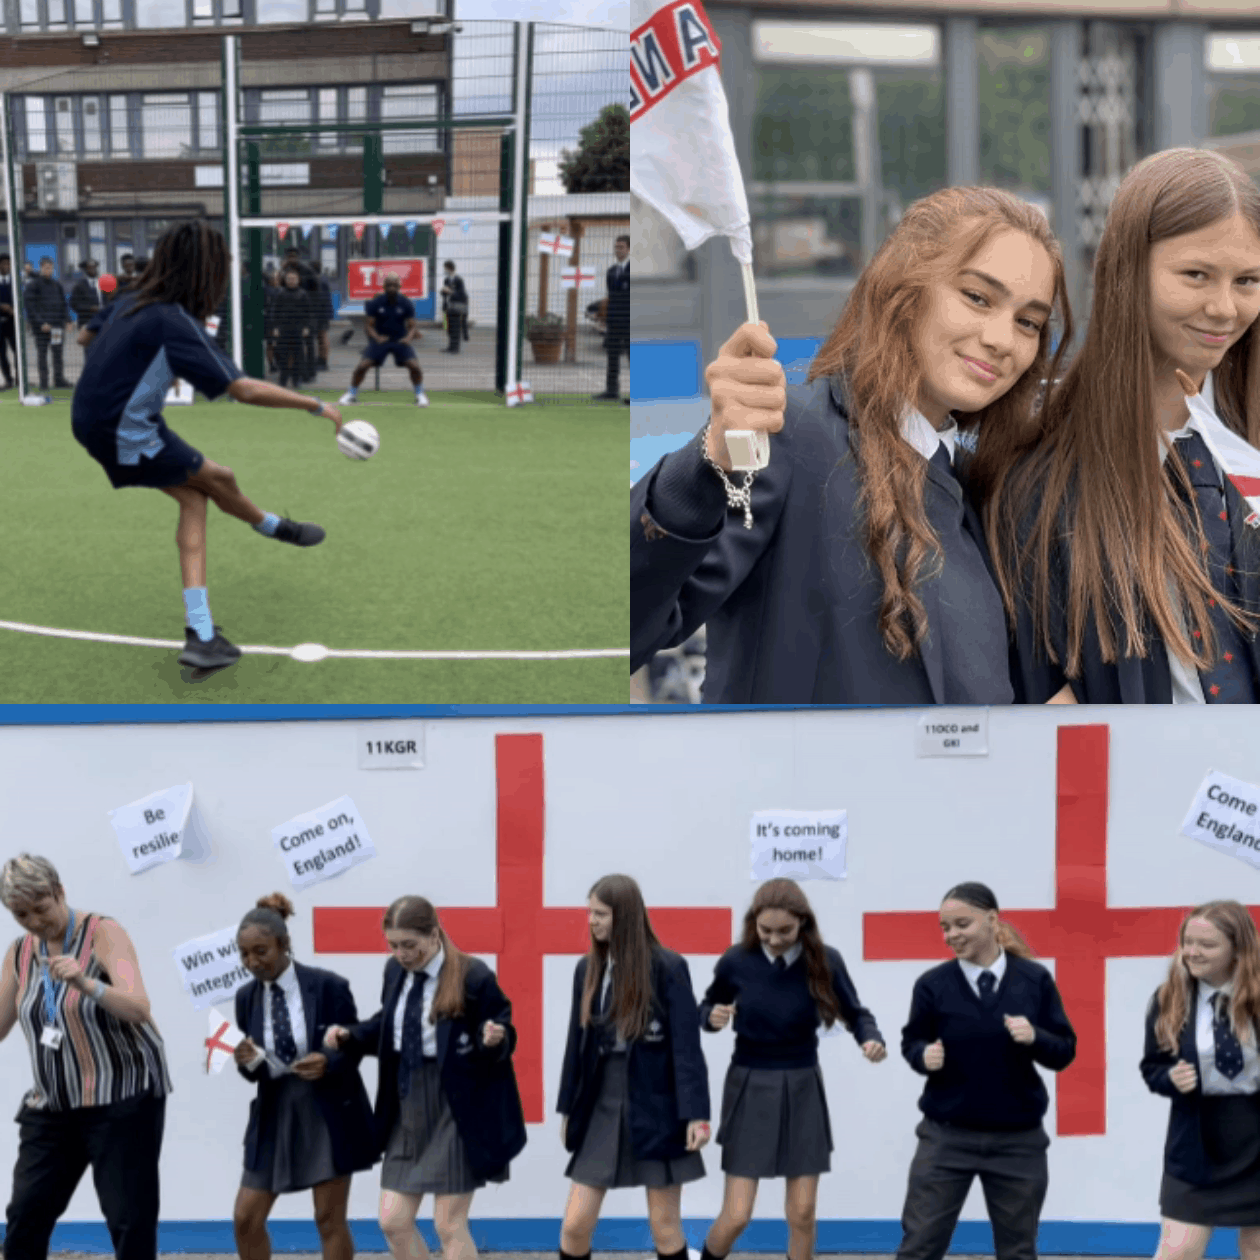 Compass students ahead of the Euro 2020 final